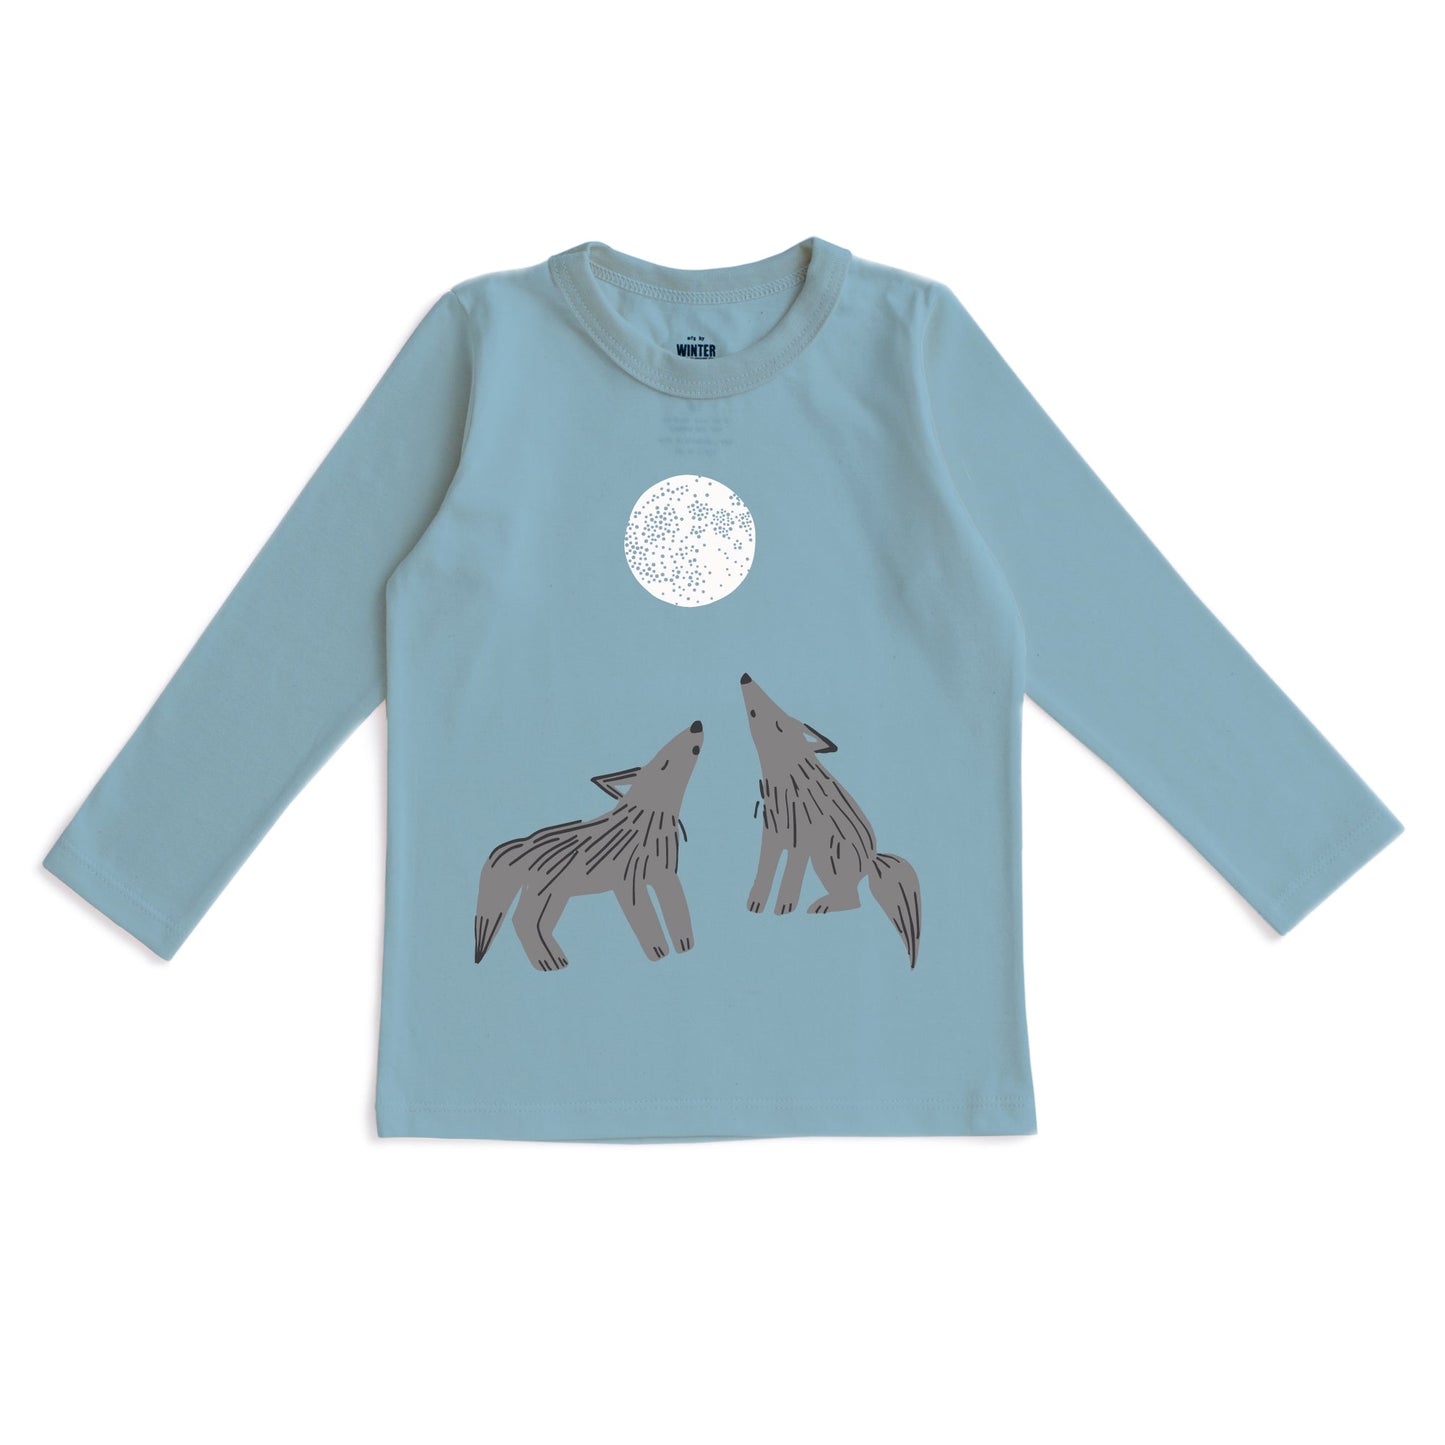 Long-Sleeve GRAPHIC Tee - Wolves Mountain Blue